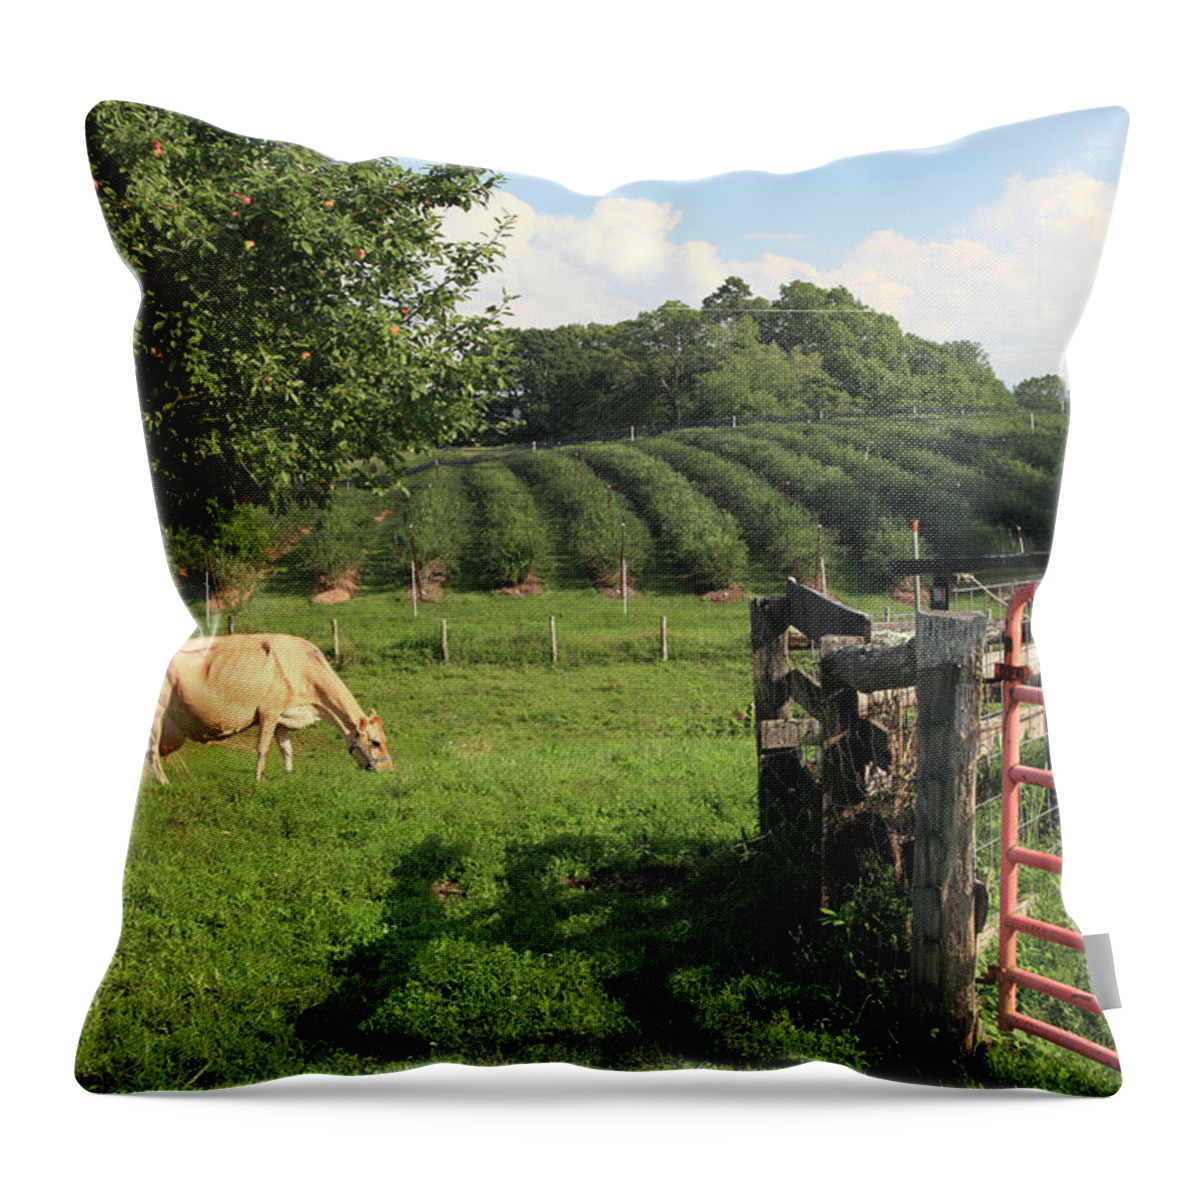 Grass Throw Pillow featuring the photograph Blueberry Farming by Mountainberryphoto